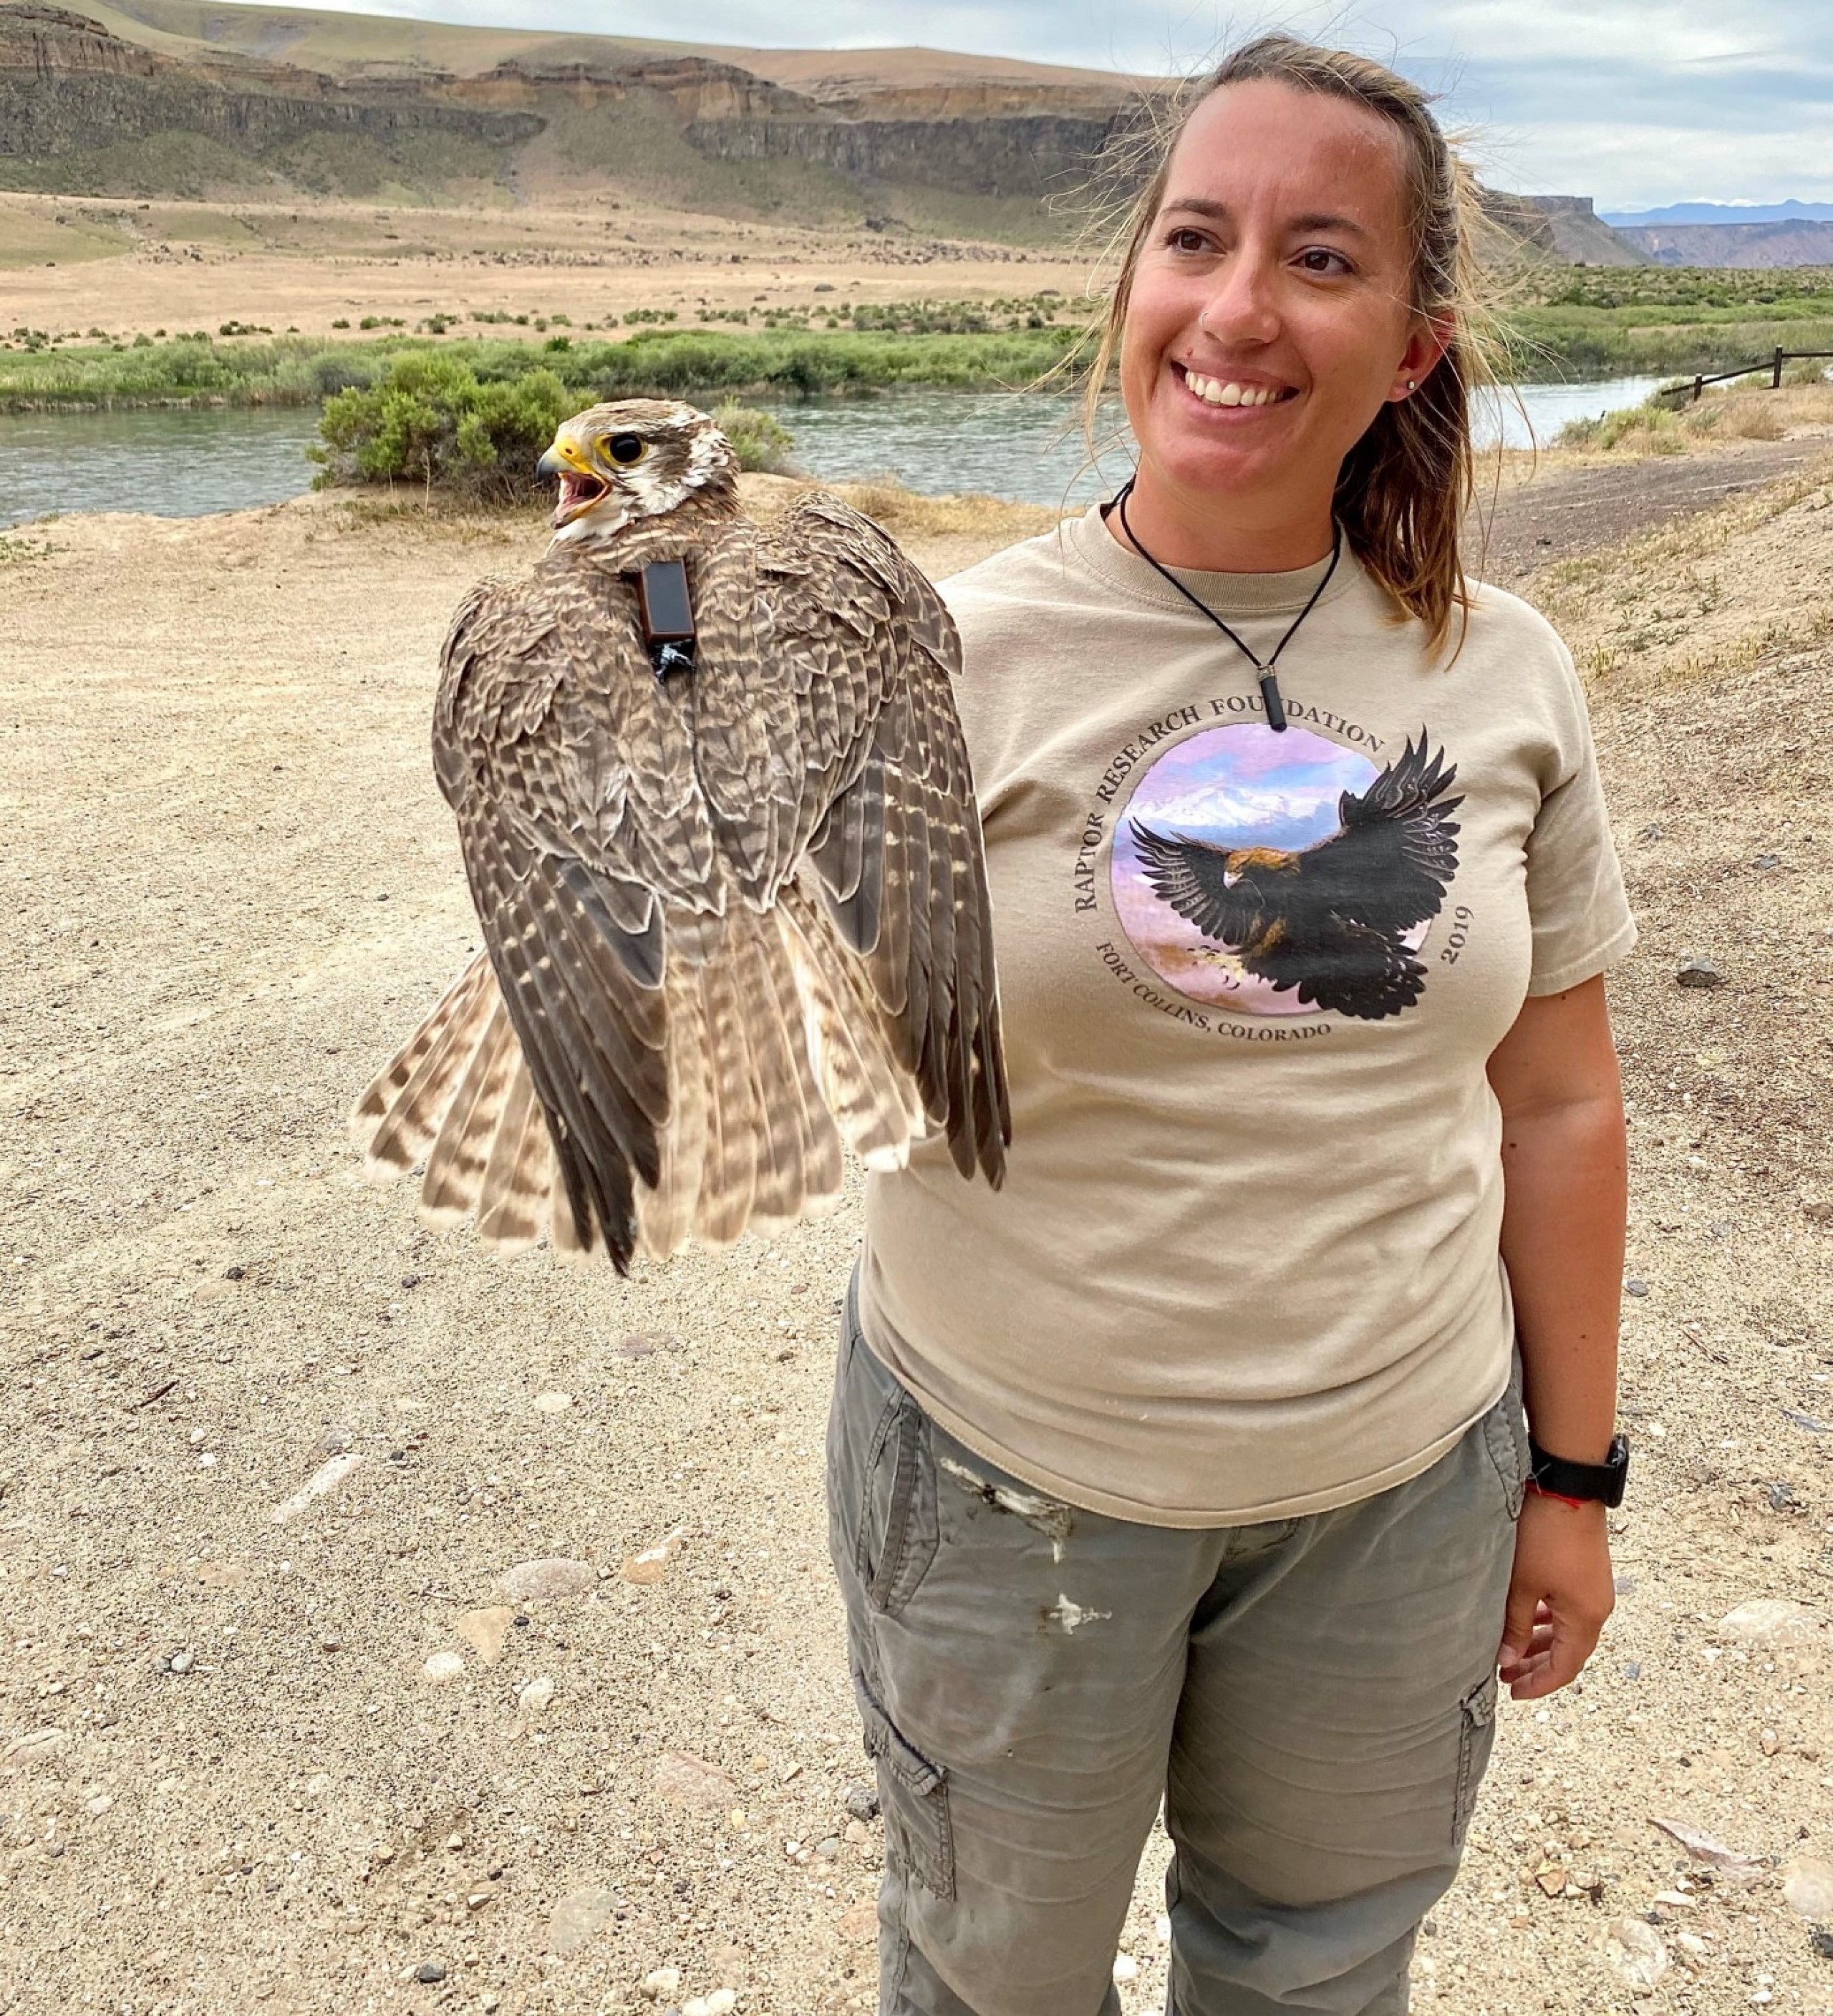 Eden Ravecca, a masters student at Boise State University, conducts research on prairie falcons in Idaho’s Snake River Canyon. Copyright photo by Eden Ravecca; used with permission.